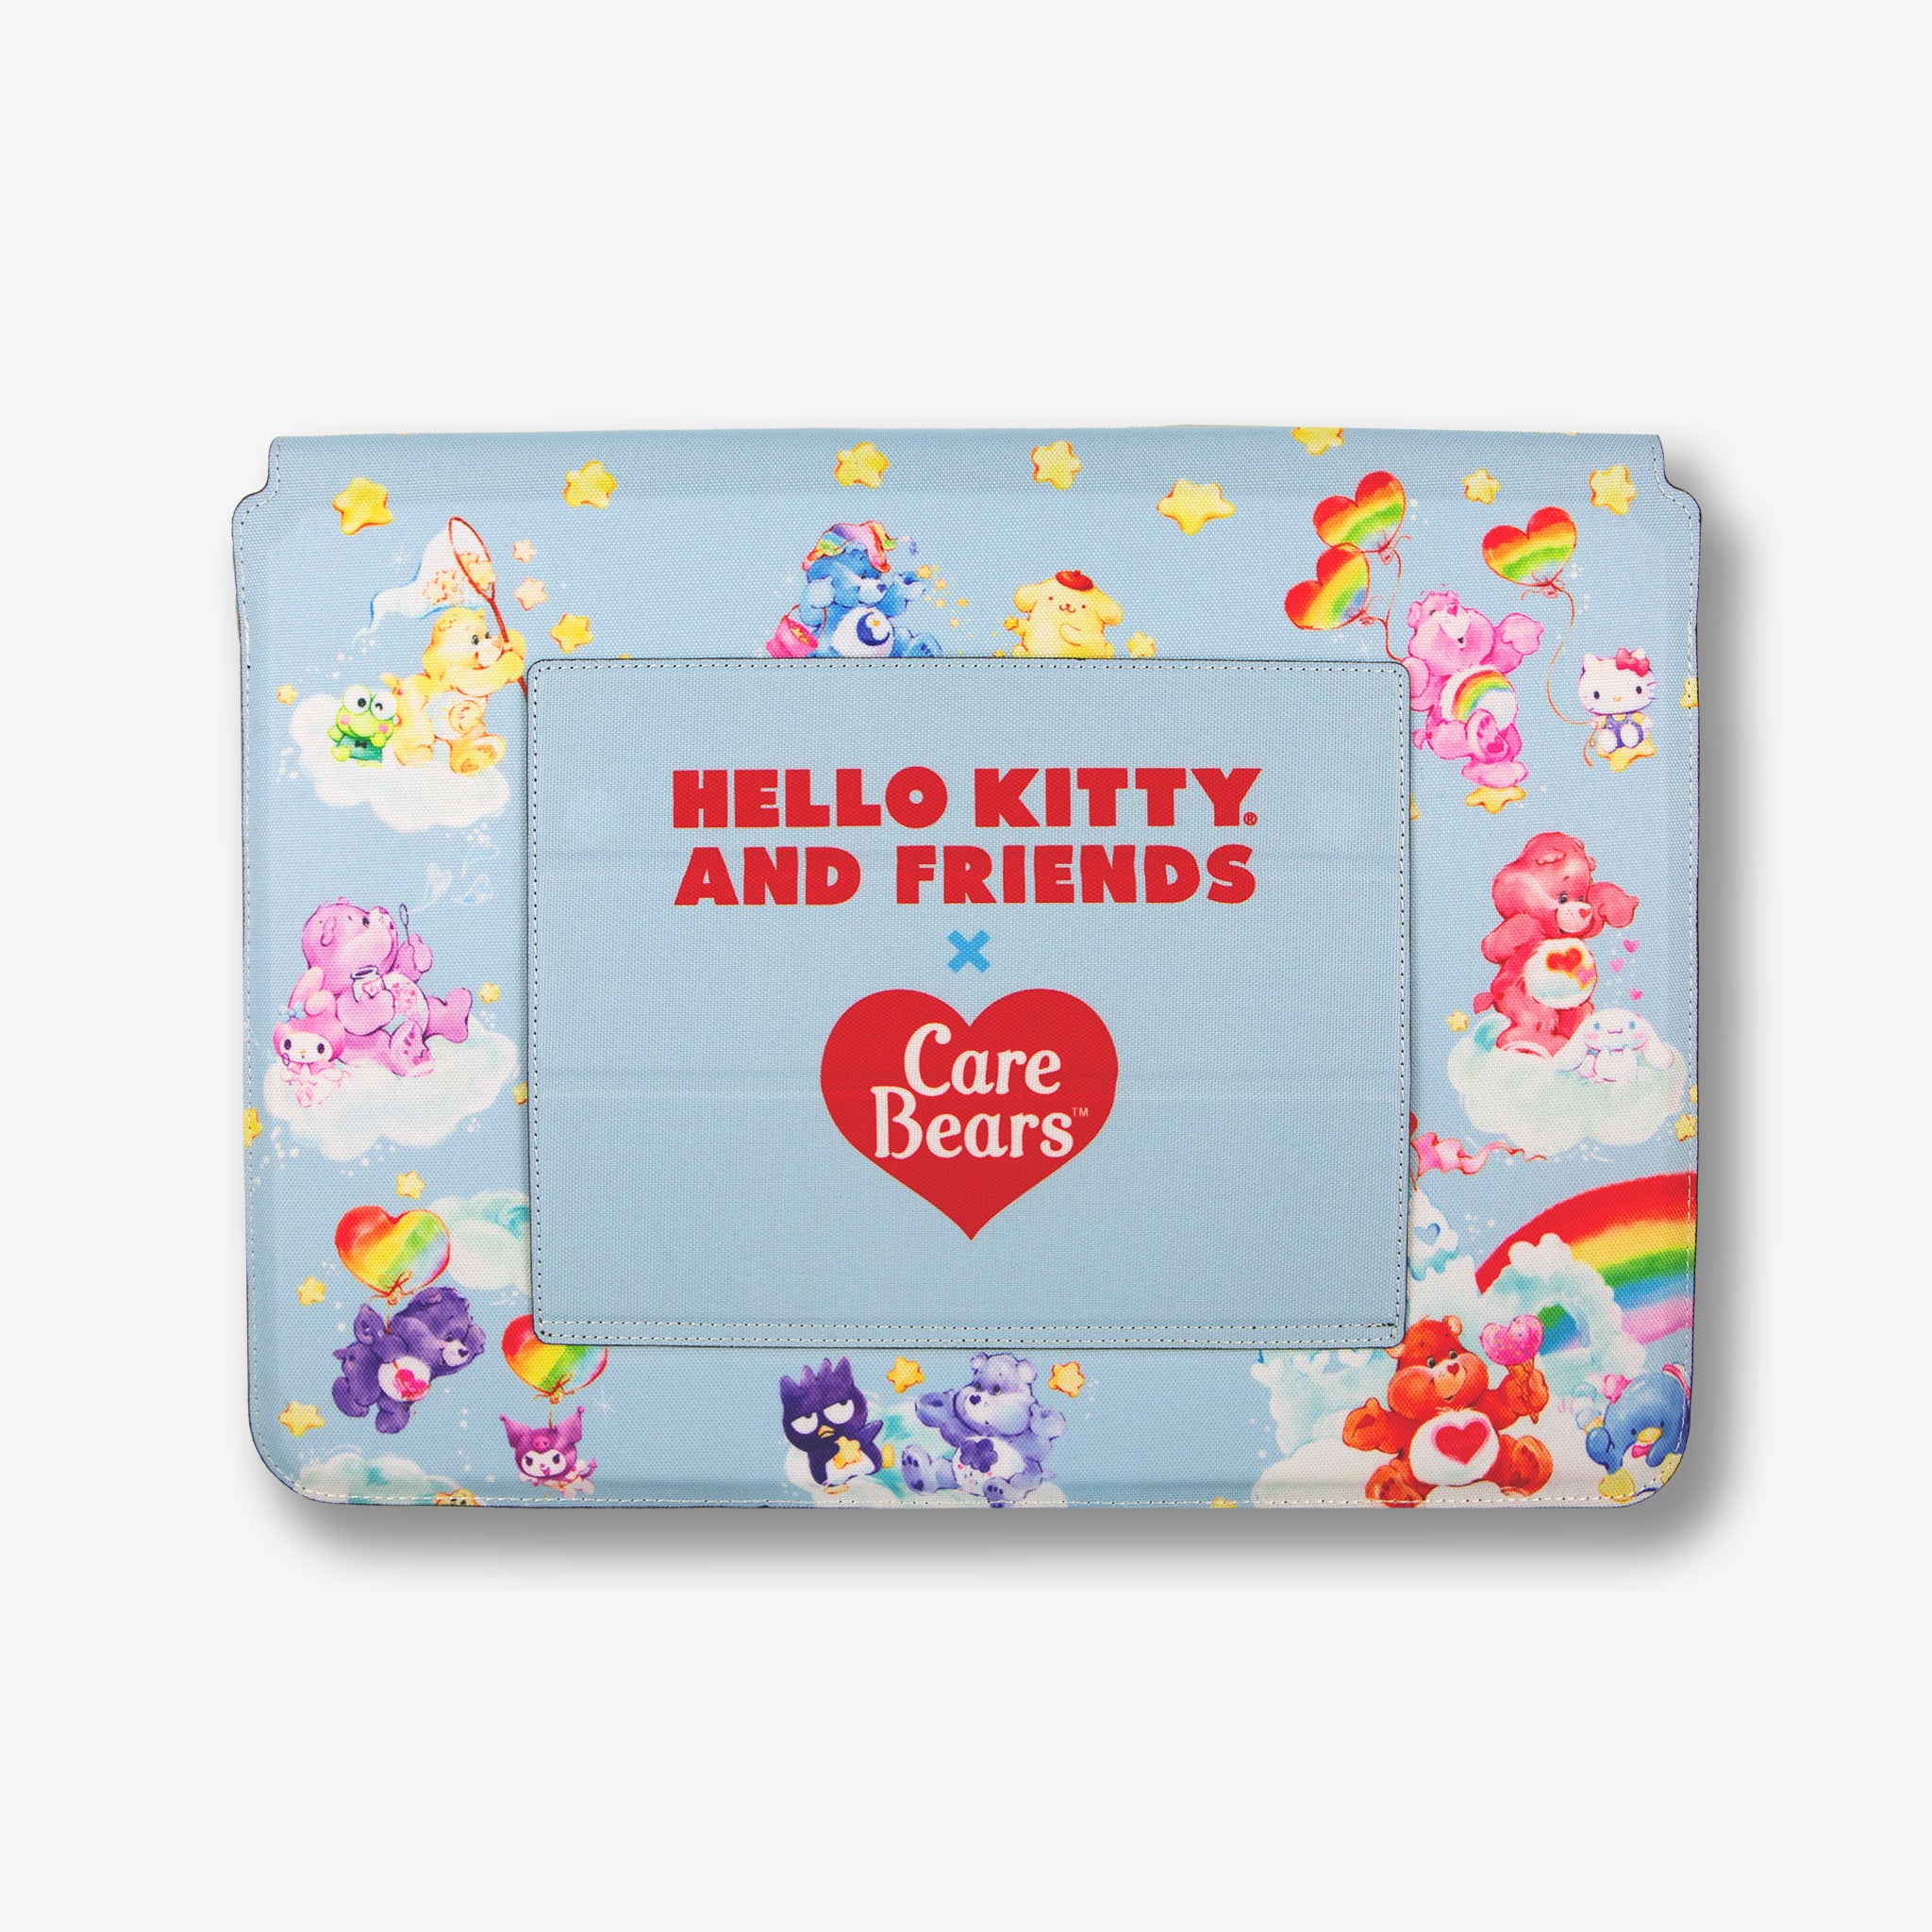 Foldable Laptop Sleeve - Care Bears™ + Hello Kitty® and Friends